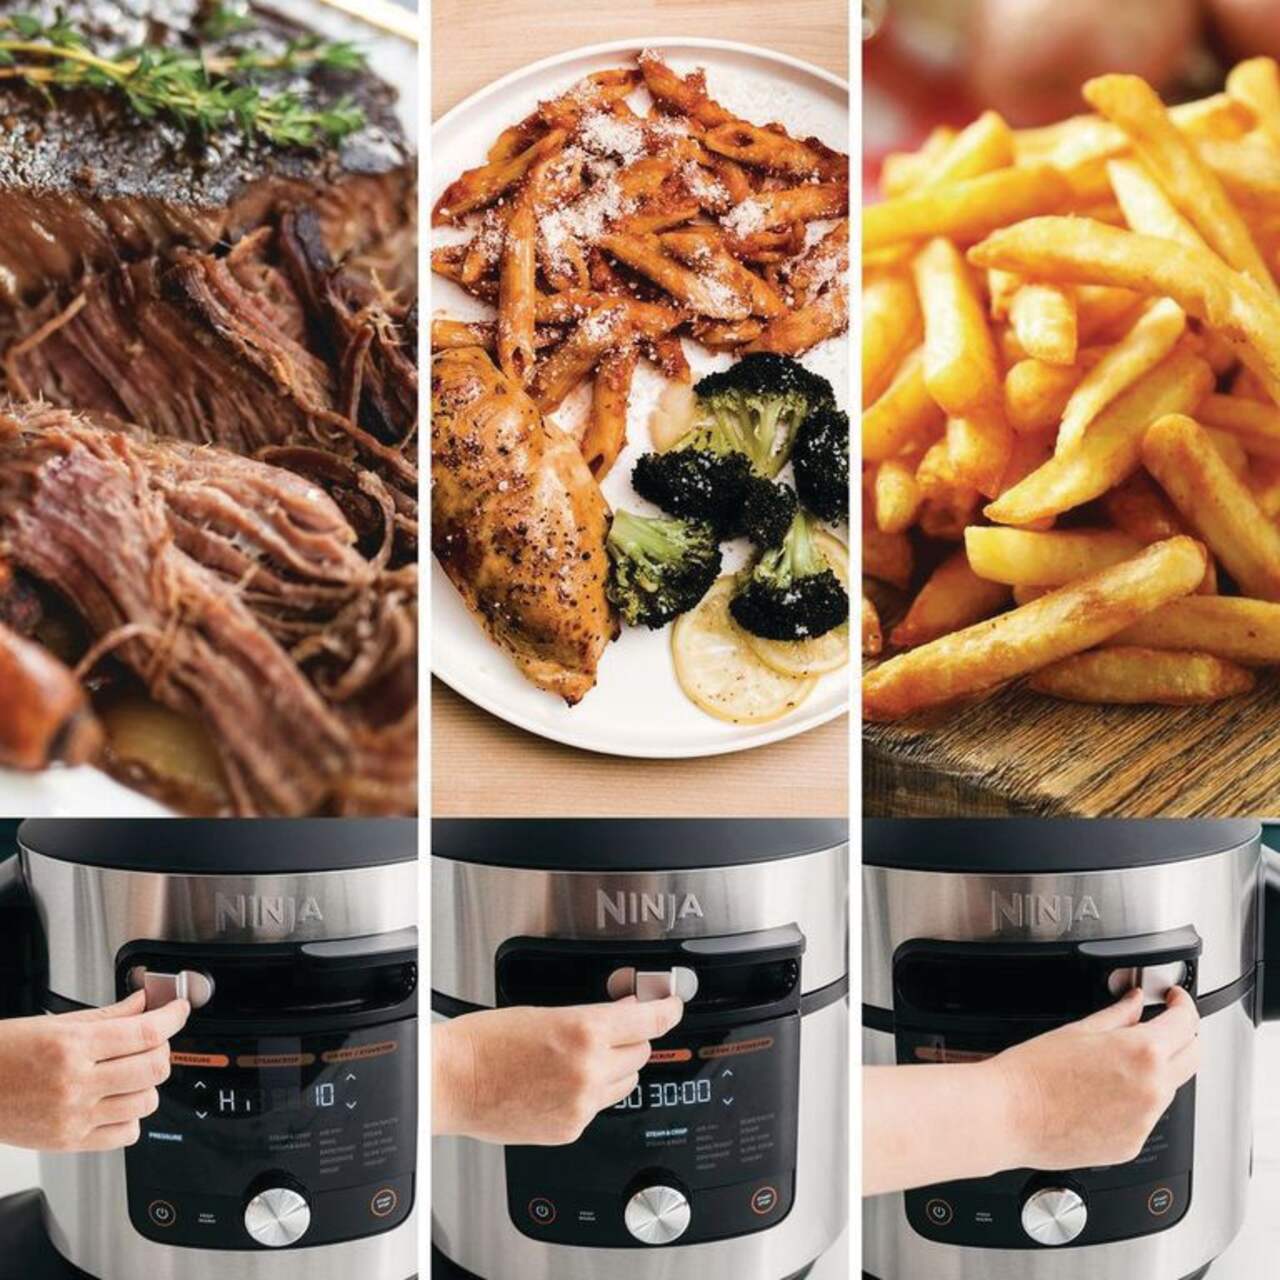 https://media-www.canadiantire.ca/product/living/kitchen/kitchen-appliances/0430959/ninja-foodi-onelid-pressure-cooker-air-fryer-1c93a643-14ac-40e7-a9f5-14370ac9f26d-jpgrendition.jpg?imdensity=1&imwidth=1244&impolicy=mZoom